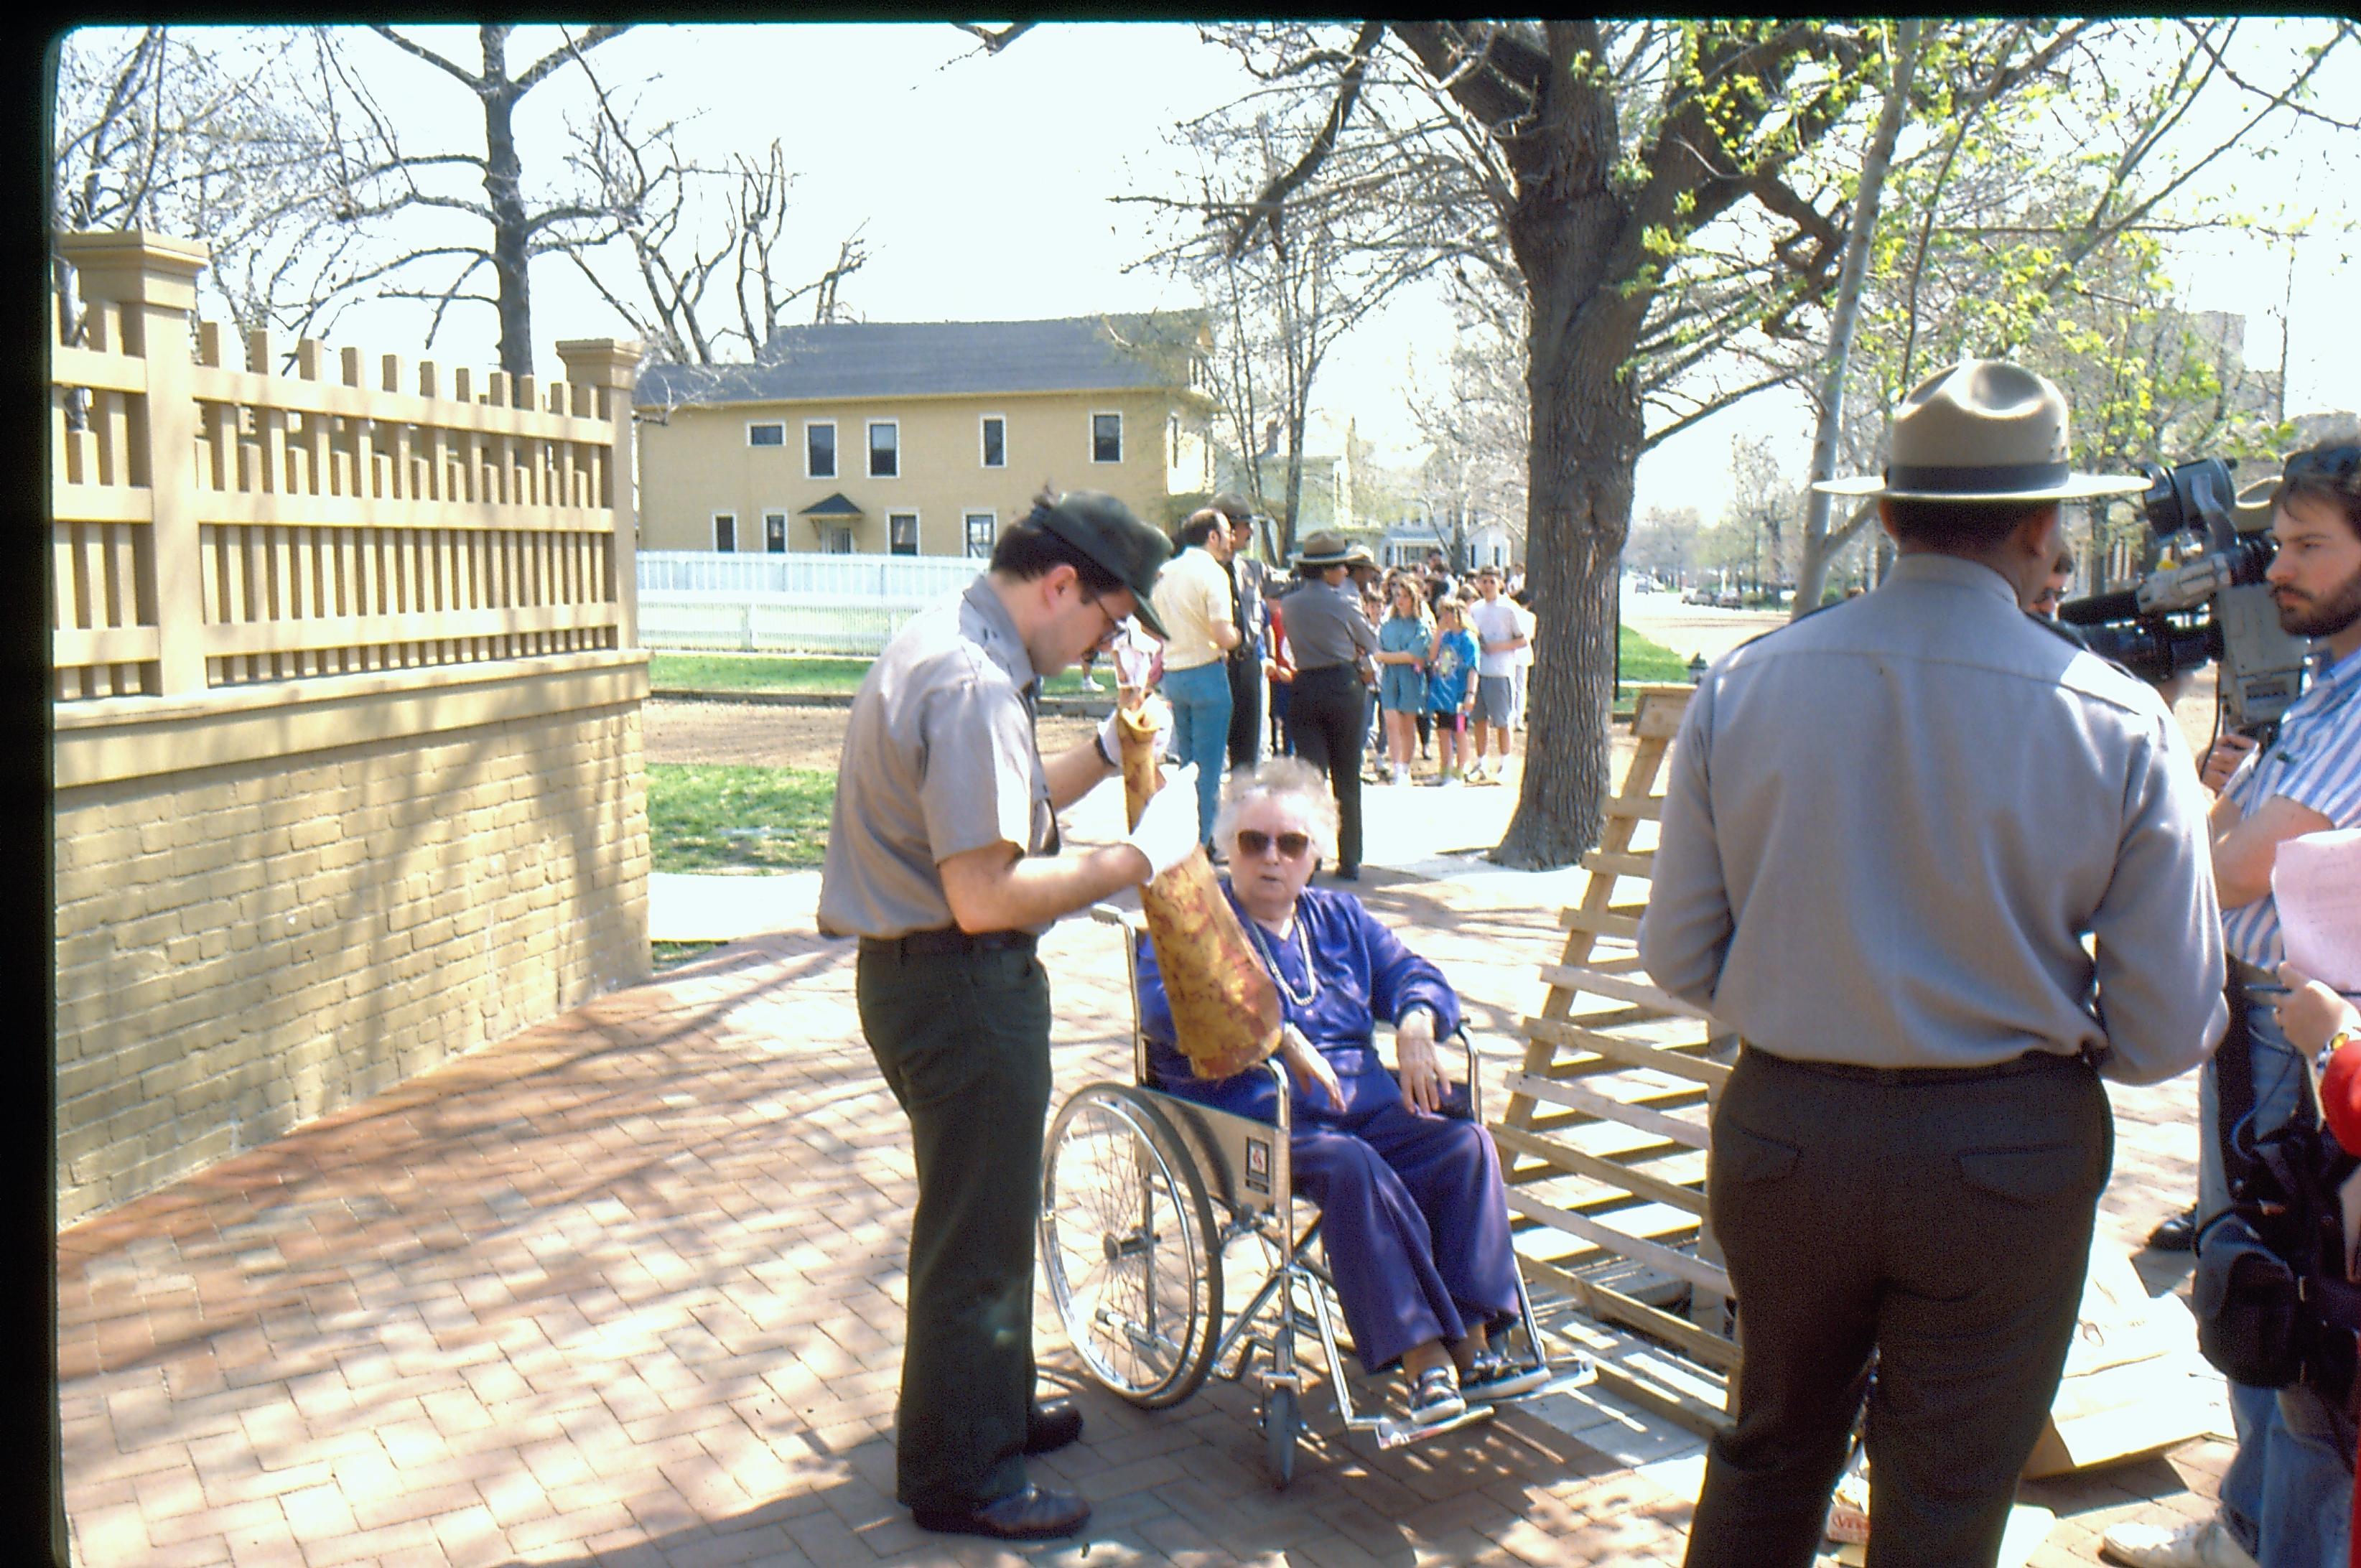 Two rangers assist a visitor in a wheelchair, as a news crew looks on. Third ranger with group in the background. Cook house in background, center. Photographer facing south east.